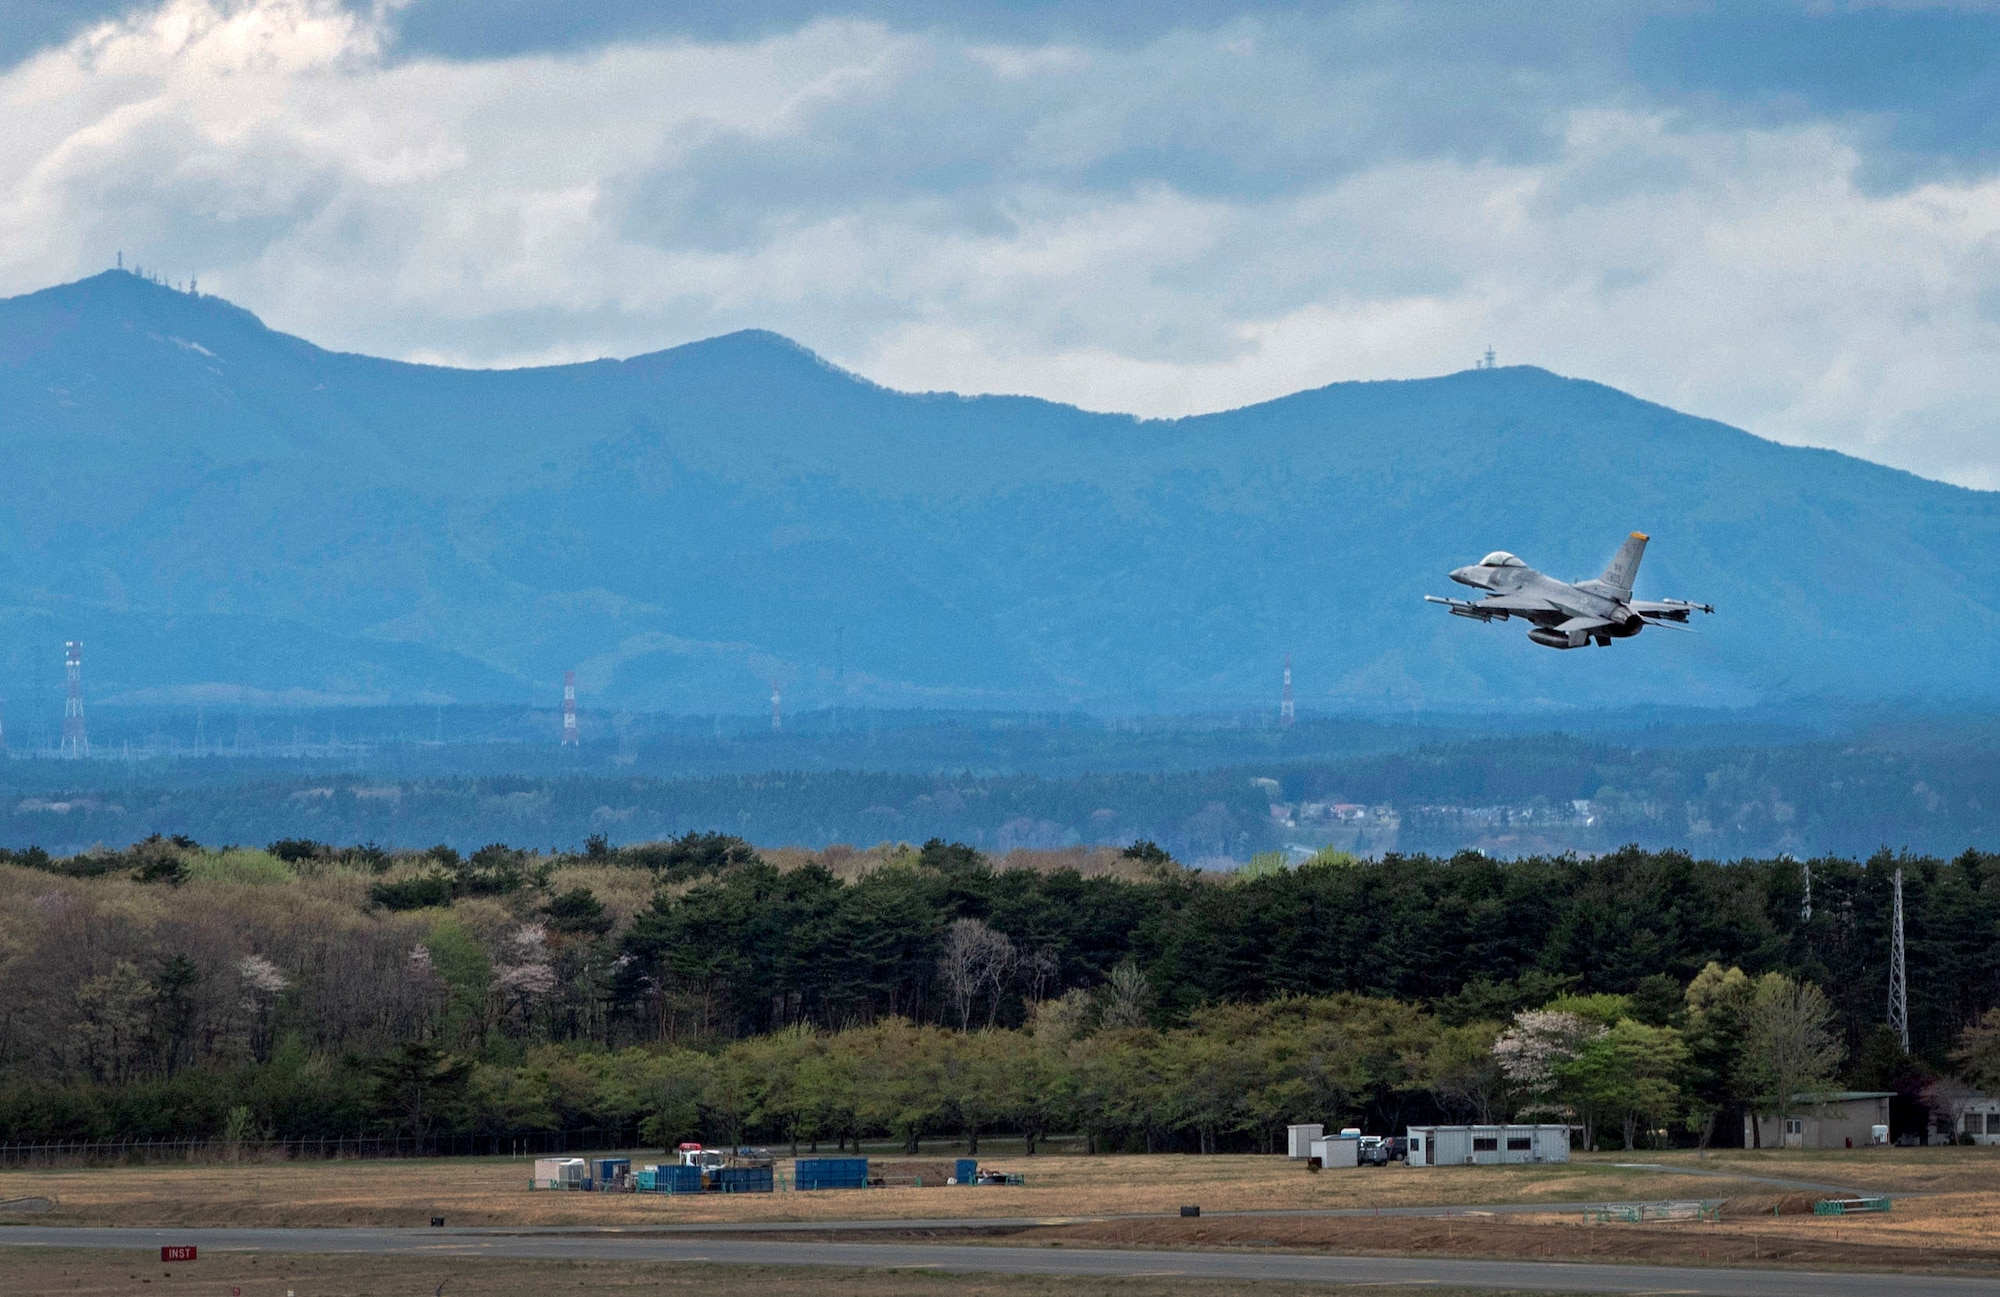 An F-16 Fighting Falcon takes off at Misawa Air Base, Japan, May 4, 2016. Misawa works alongside other bases throughout the Pacific Theater to provide agile combat support, while increasing the United States’ partnership between international allies. The wing’s capabilities are tested through training sorties ensuring pilots are prepared to fight tonight. (U.S. Air Force photo by Airman 1st Class Jordyn Fetter)